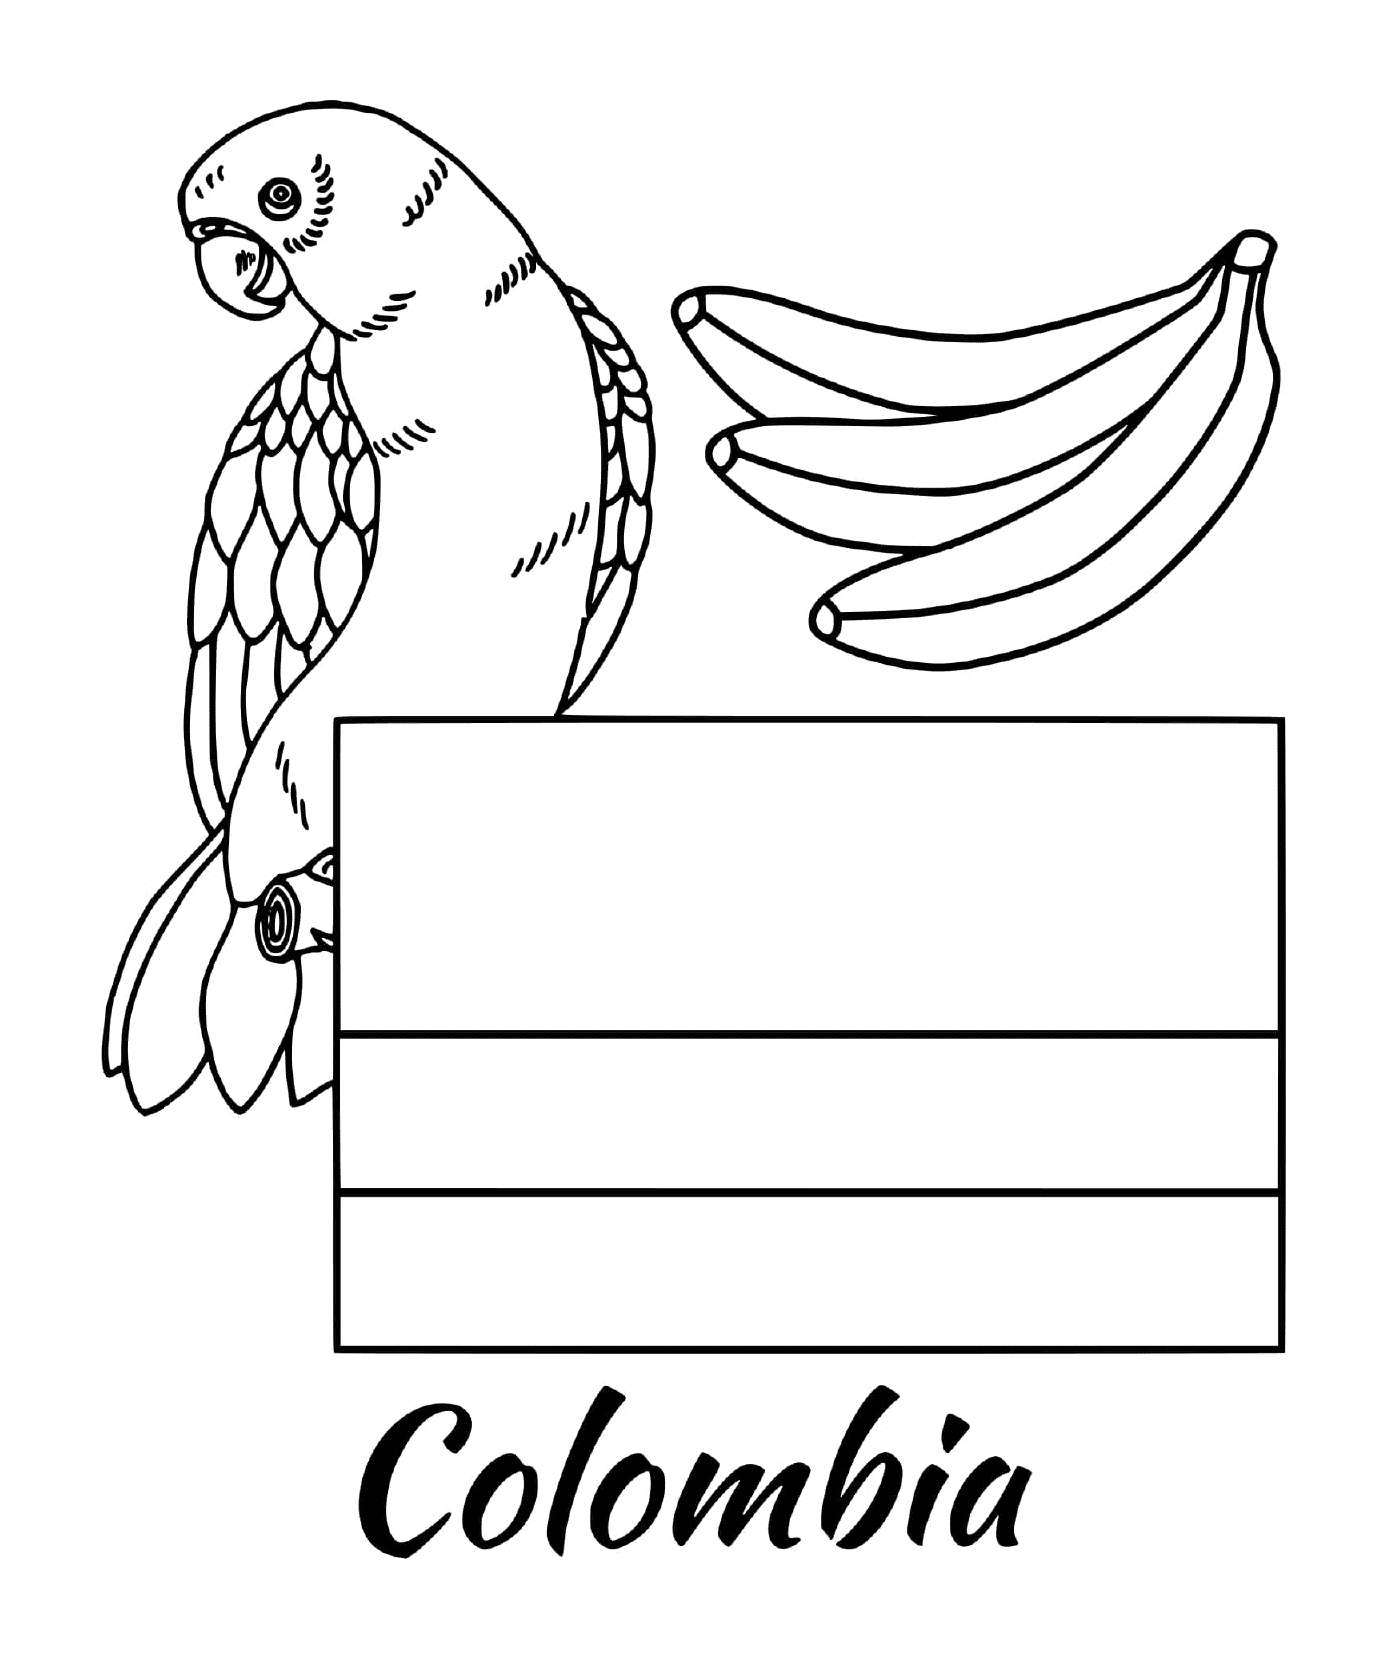  Flag of Colombia, parrot 